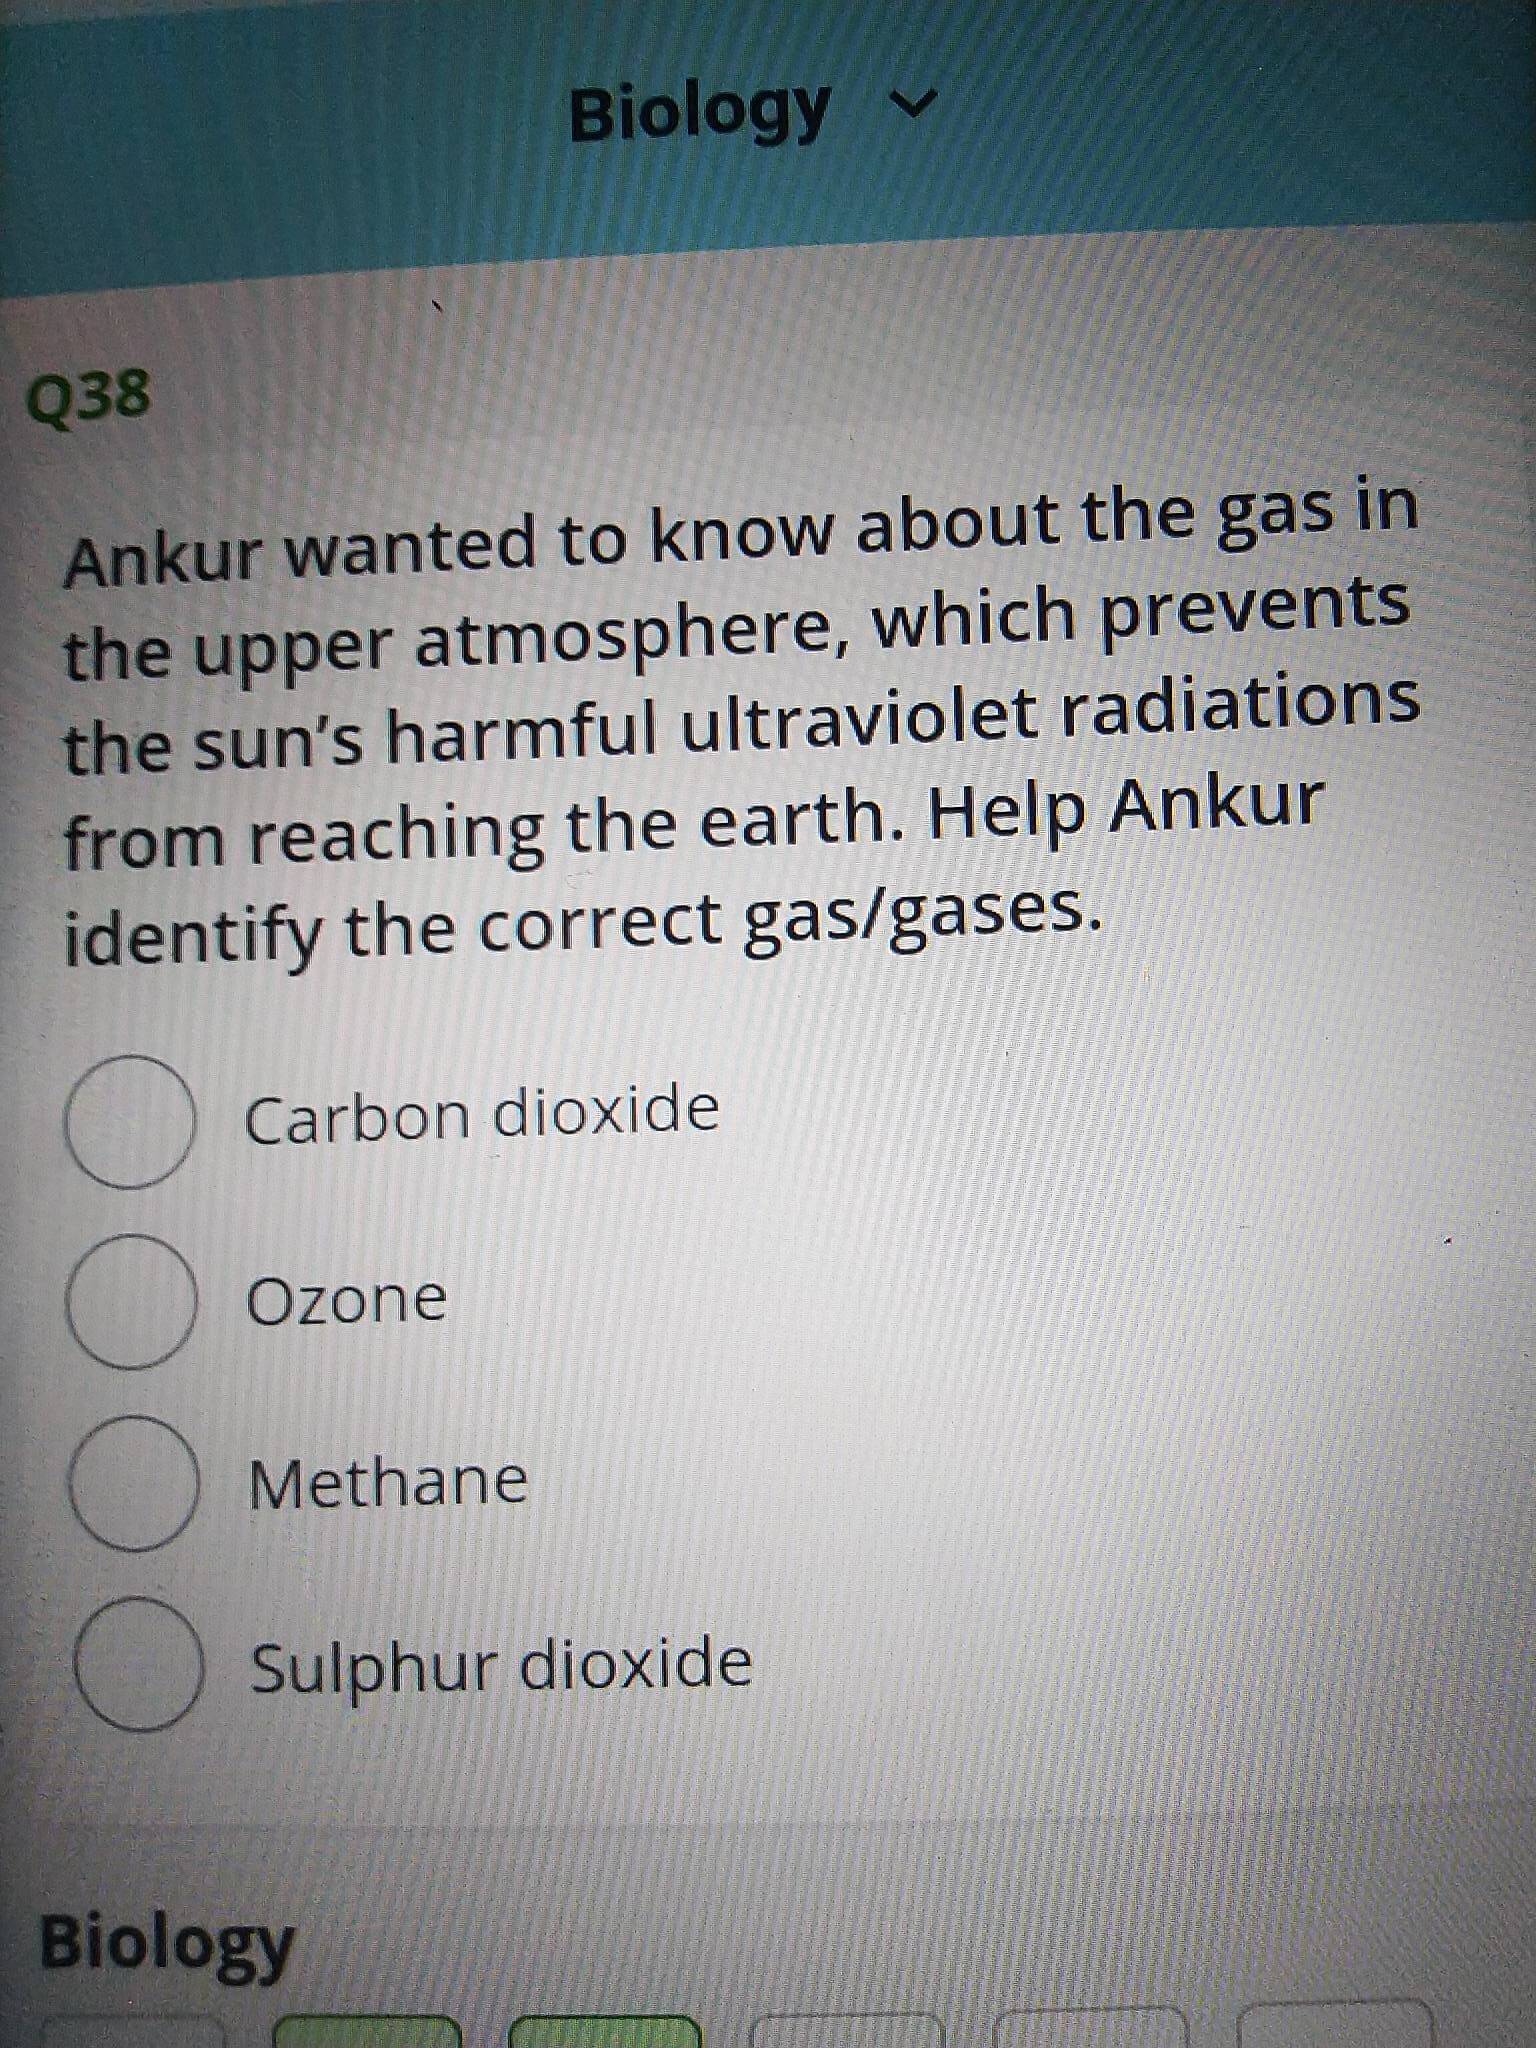 OOO
Biology v
Q38
Ankur wanted to know about the gas in
the upper atmosphere, which prevents
the sun's harmful ultraviolet radiations
from reaching the earth. Help Ankur
identify the correct gas/gases.
() Carbon dioxide
Ozone
() Methane
Sulphur dioxide
Biology
